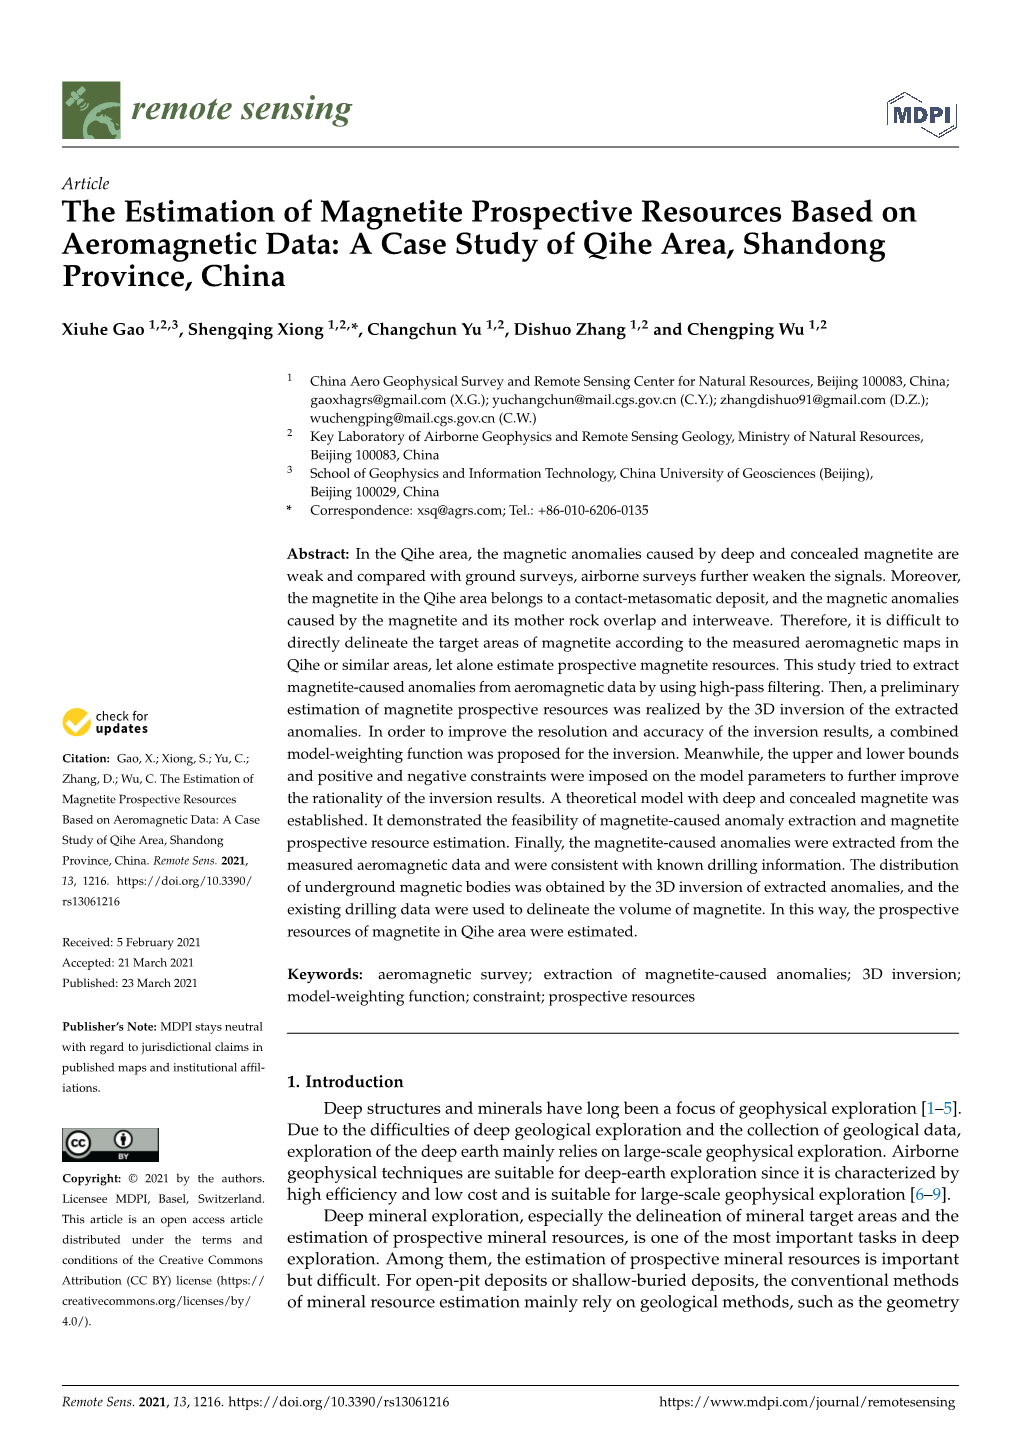 The Estimation of Magnetite Prospective Resources Based on Aeromagnetic Data: a Case Study of Qihe Area, Shandong Province, China